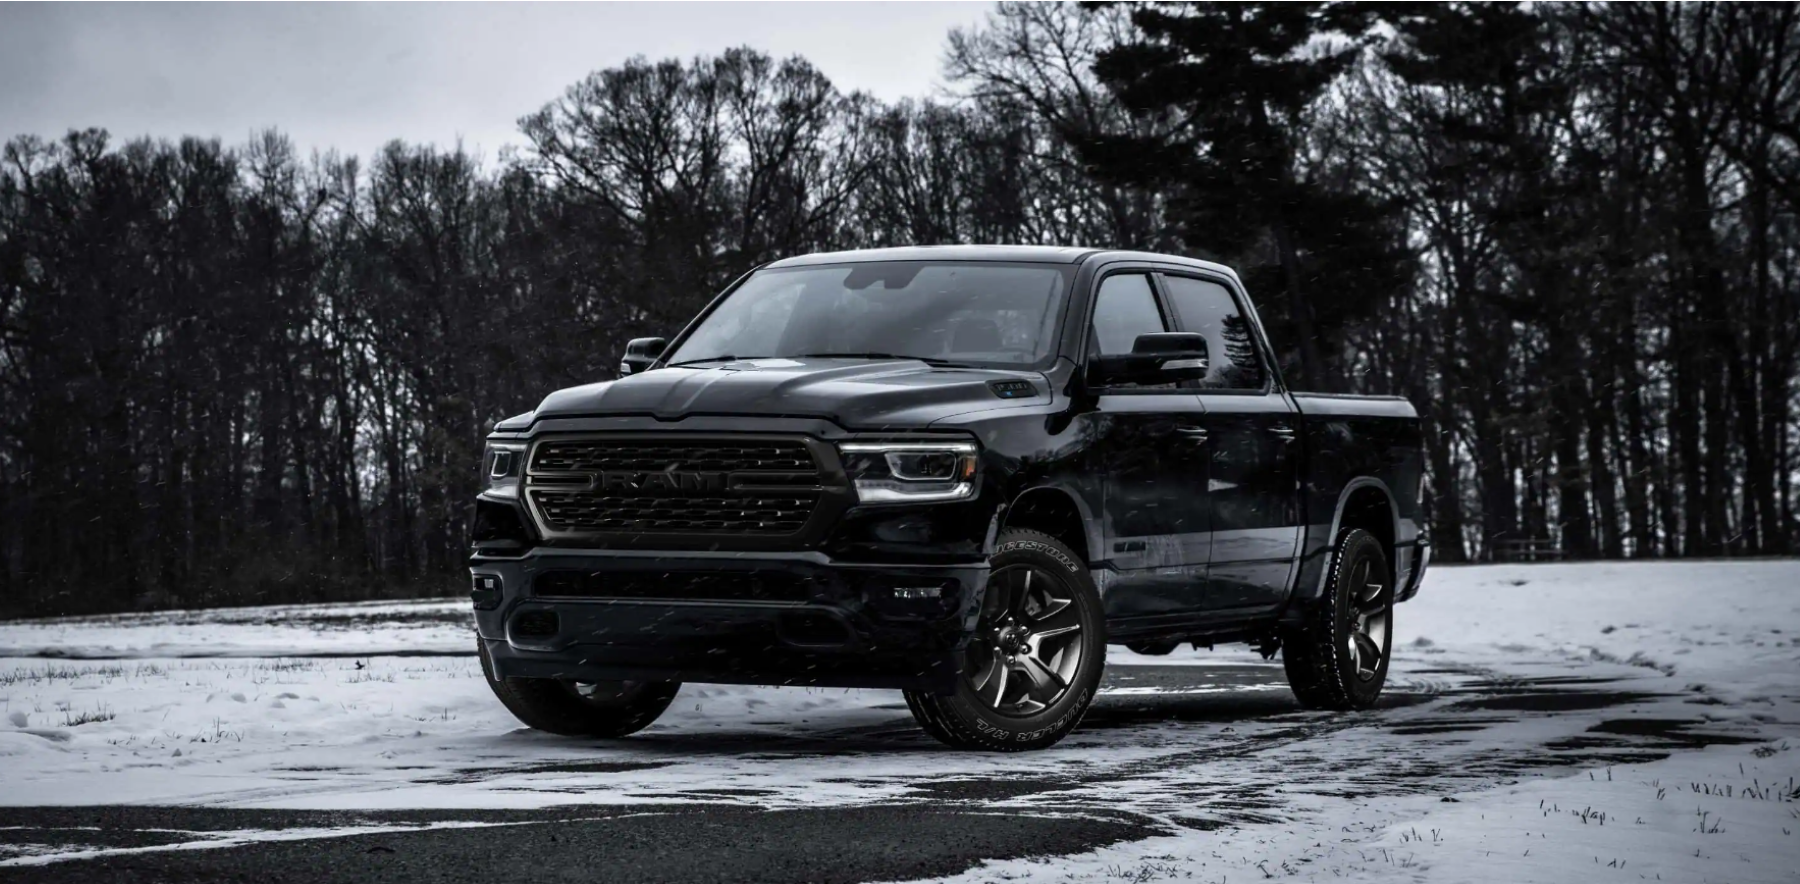 A black 2022 Ram 1500 full-size pickup truck parked on grass covered snow near barren trees